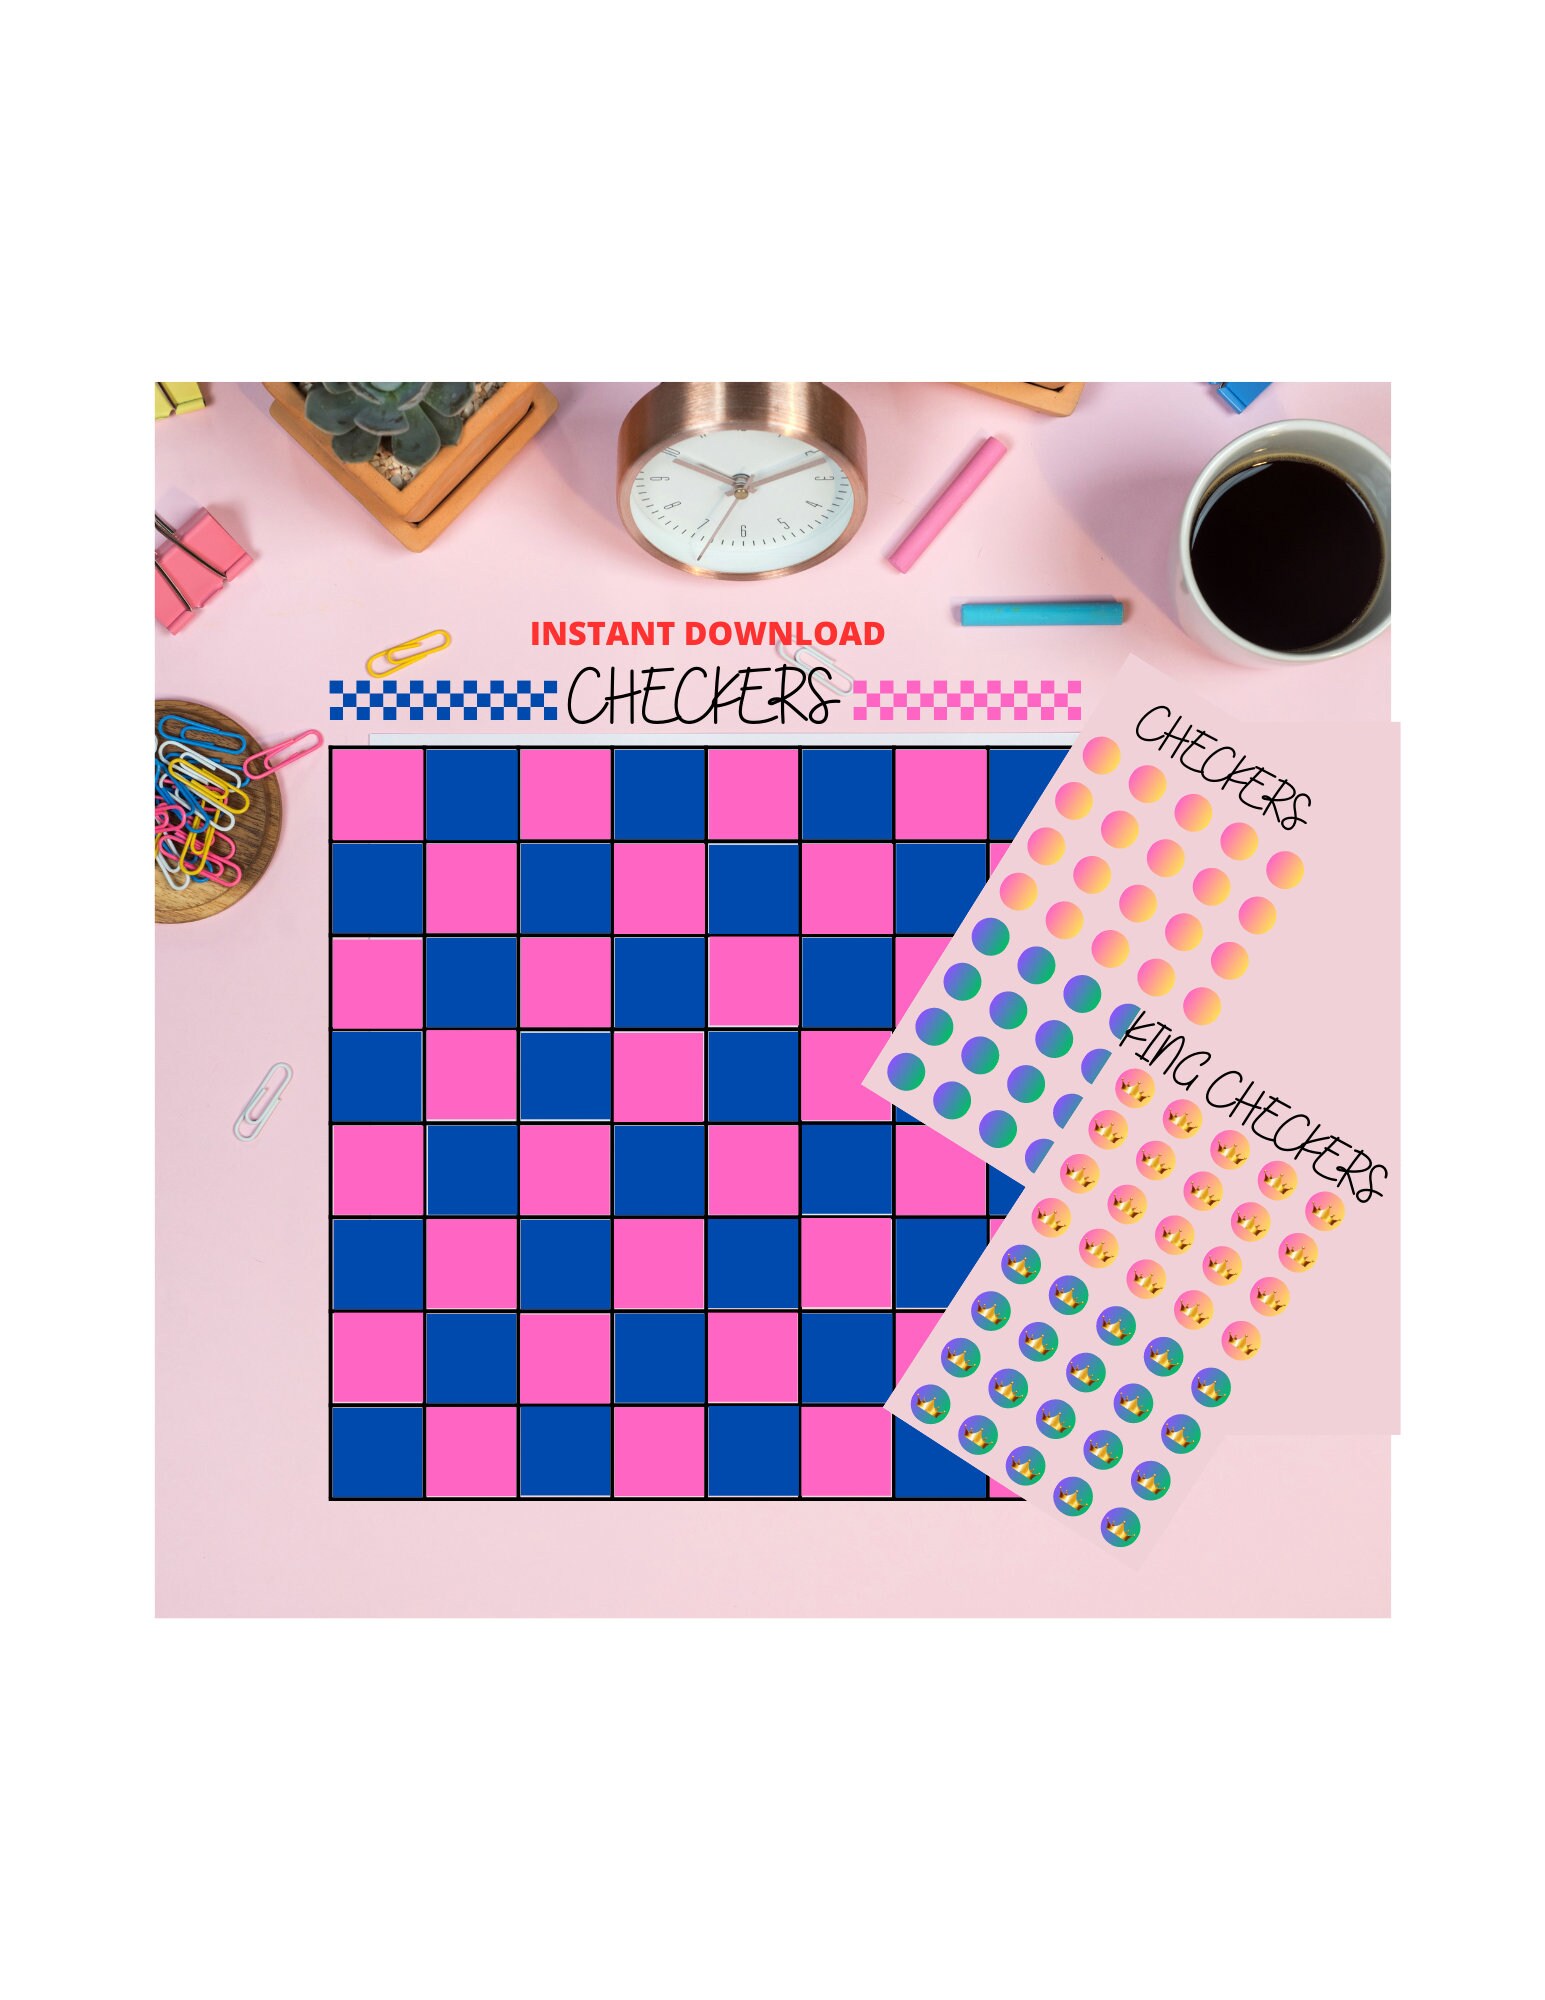 Checkers Instant Download Game Checkers Printable Game Mini - Etsy